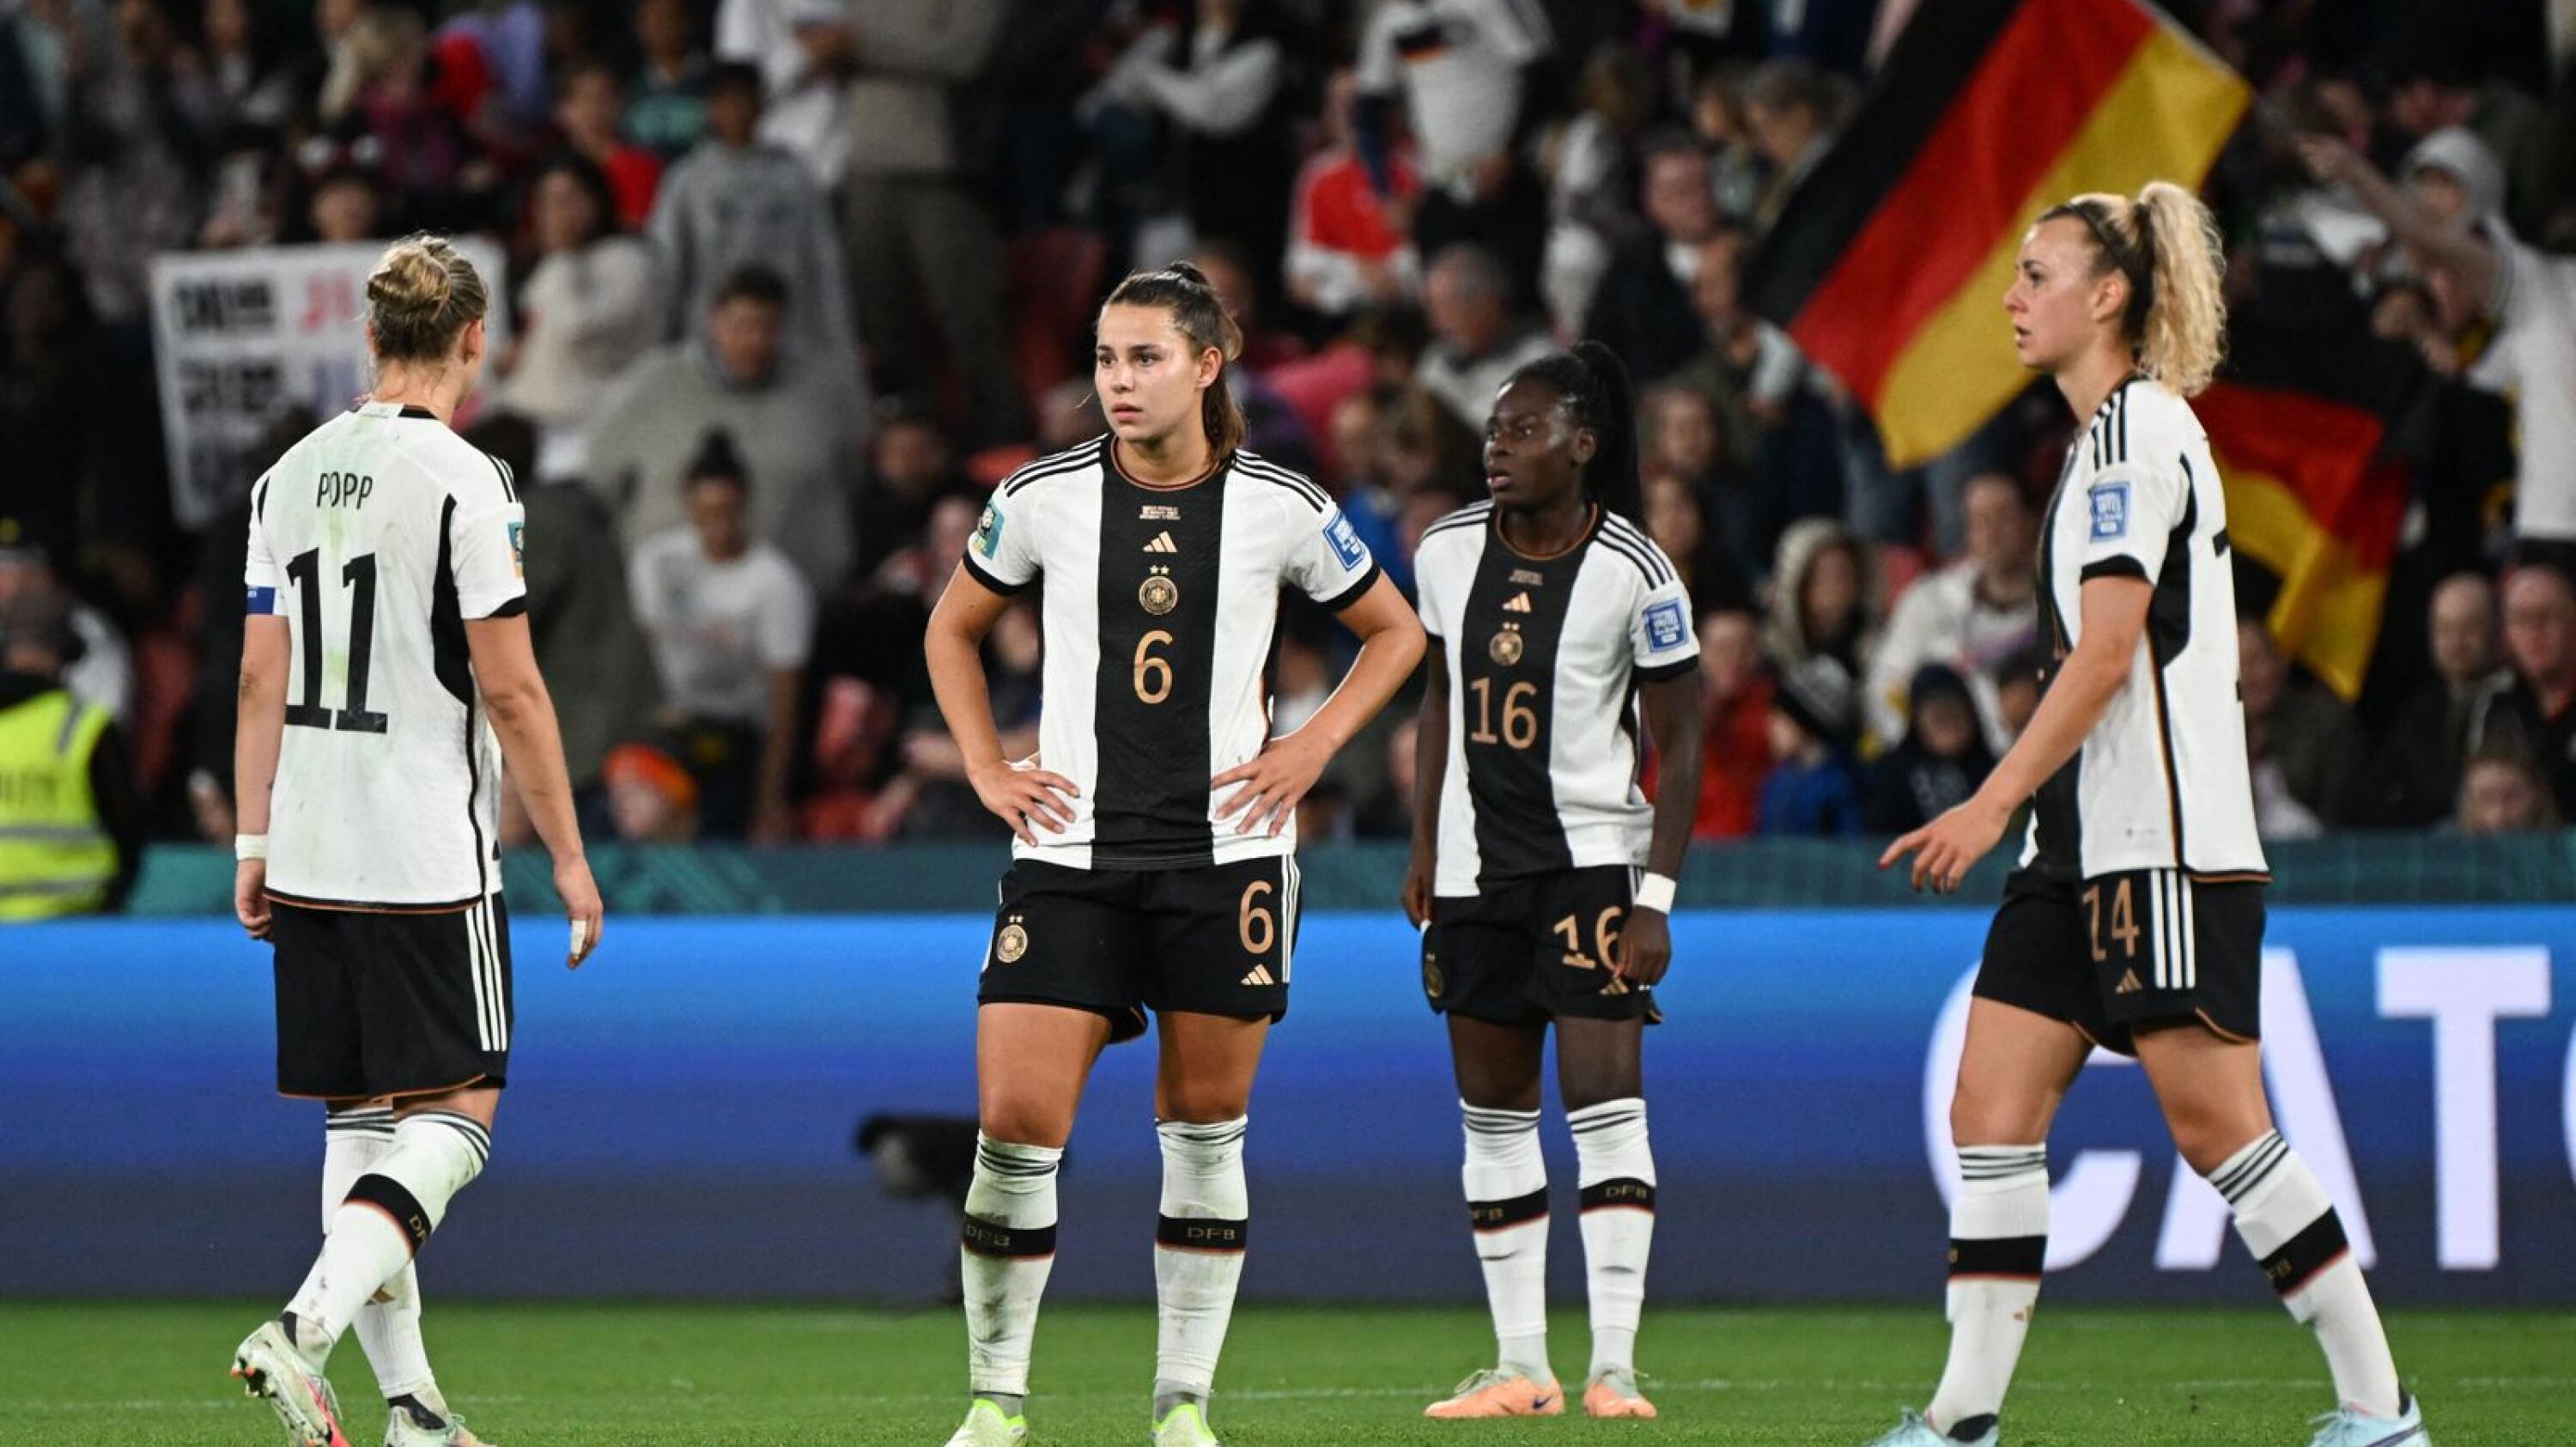 Lena Oberdorf and teammates look dejected after Germany are knocked out of the World Cup after their draw against South Korea on Thursday